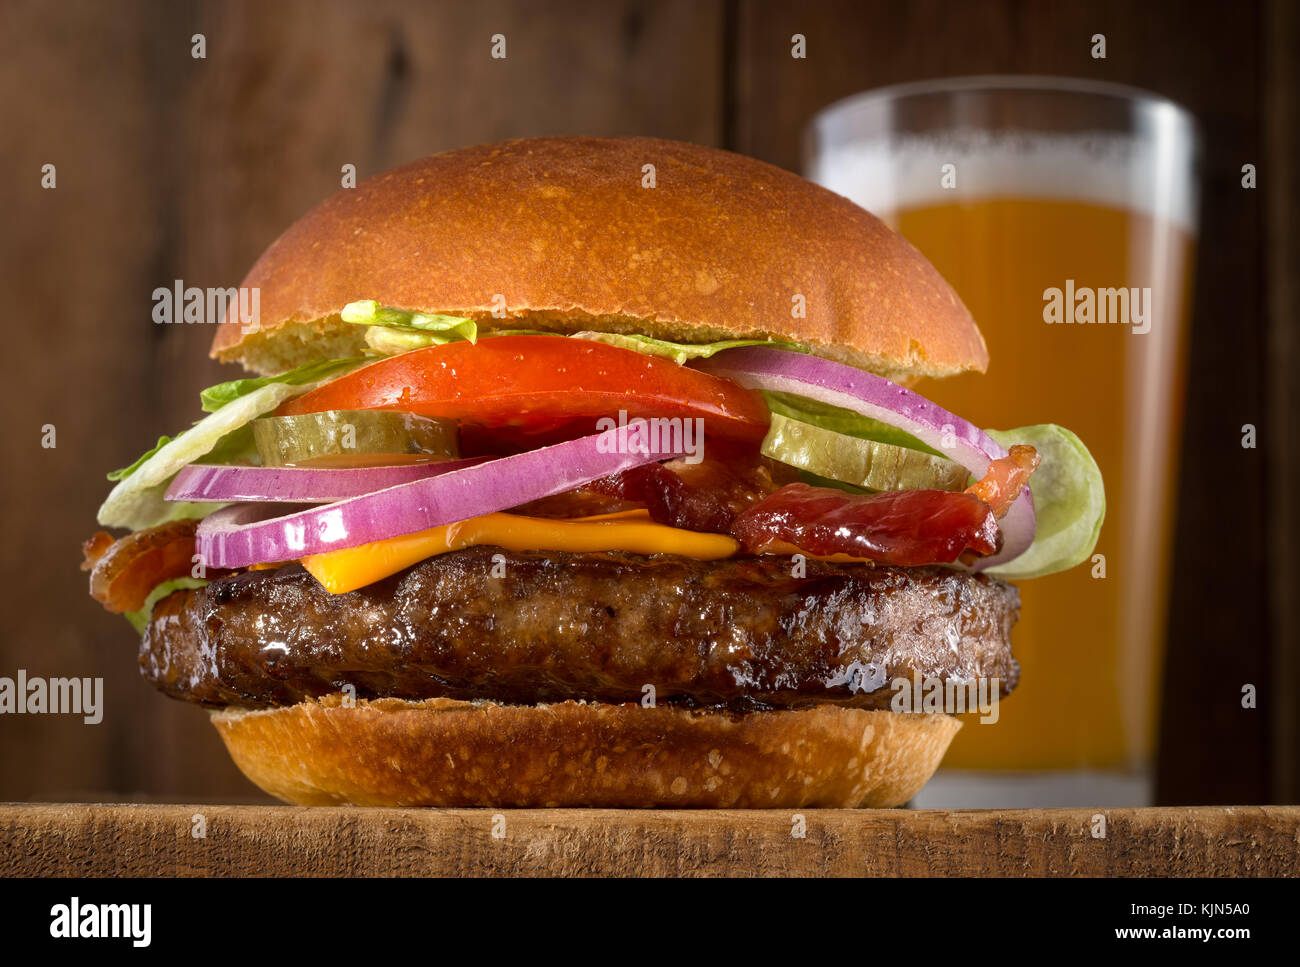 A juicy delicious cheeseburger with bacon, lettuce, tomato, red onions and pickle with a glass of beer. Stock Photo